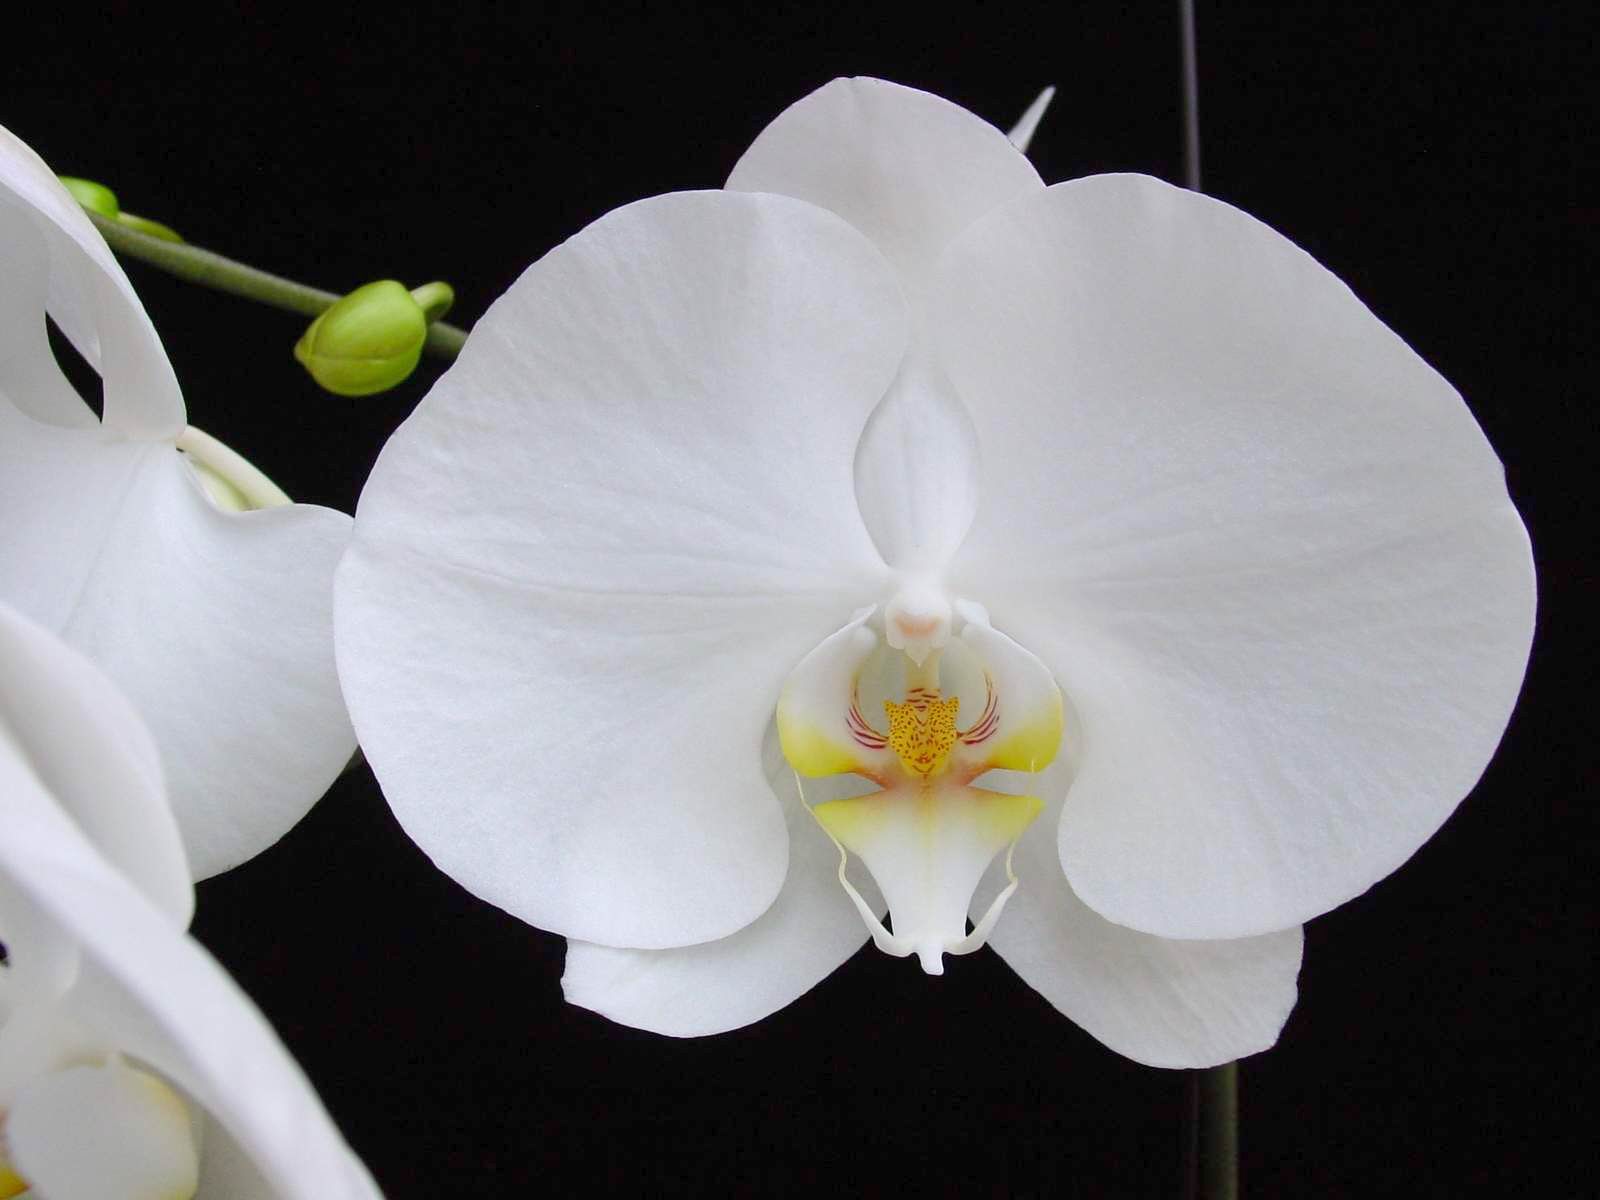 Phalaenopsis Orchid | The Tony Brewer & Co. Blog